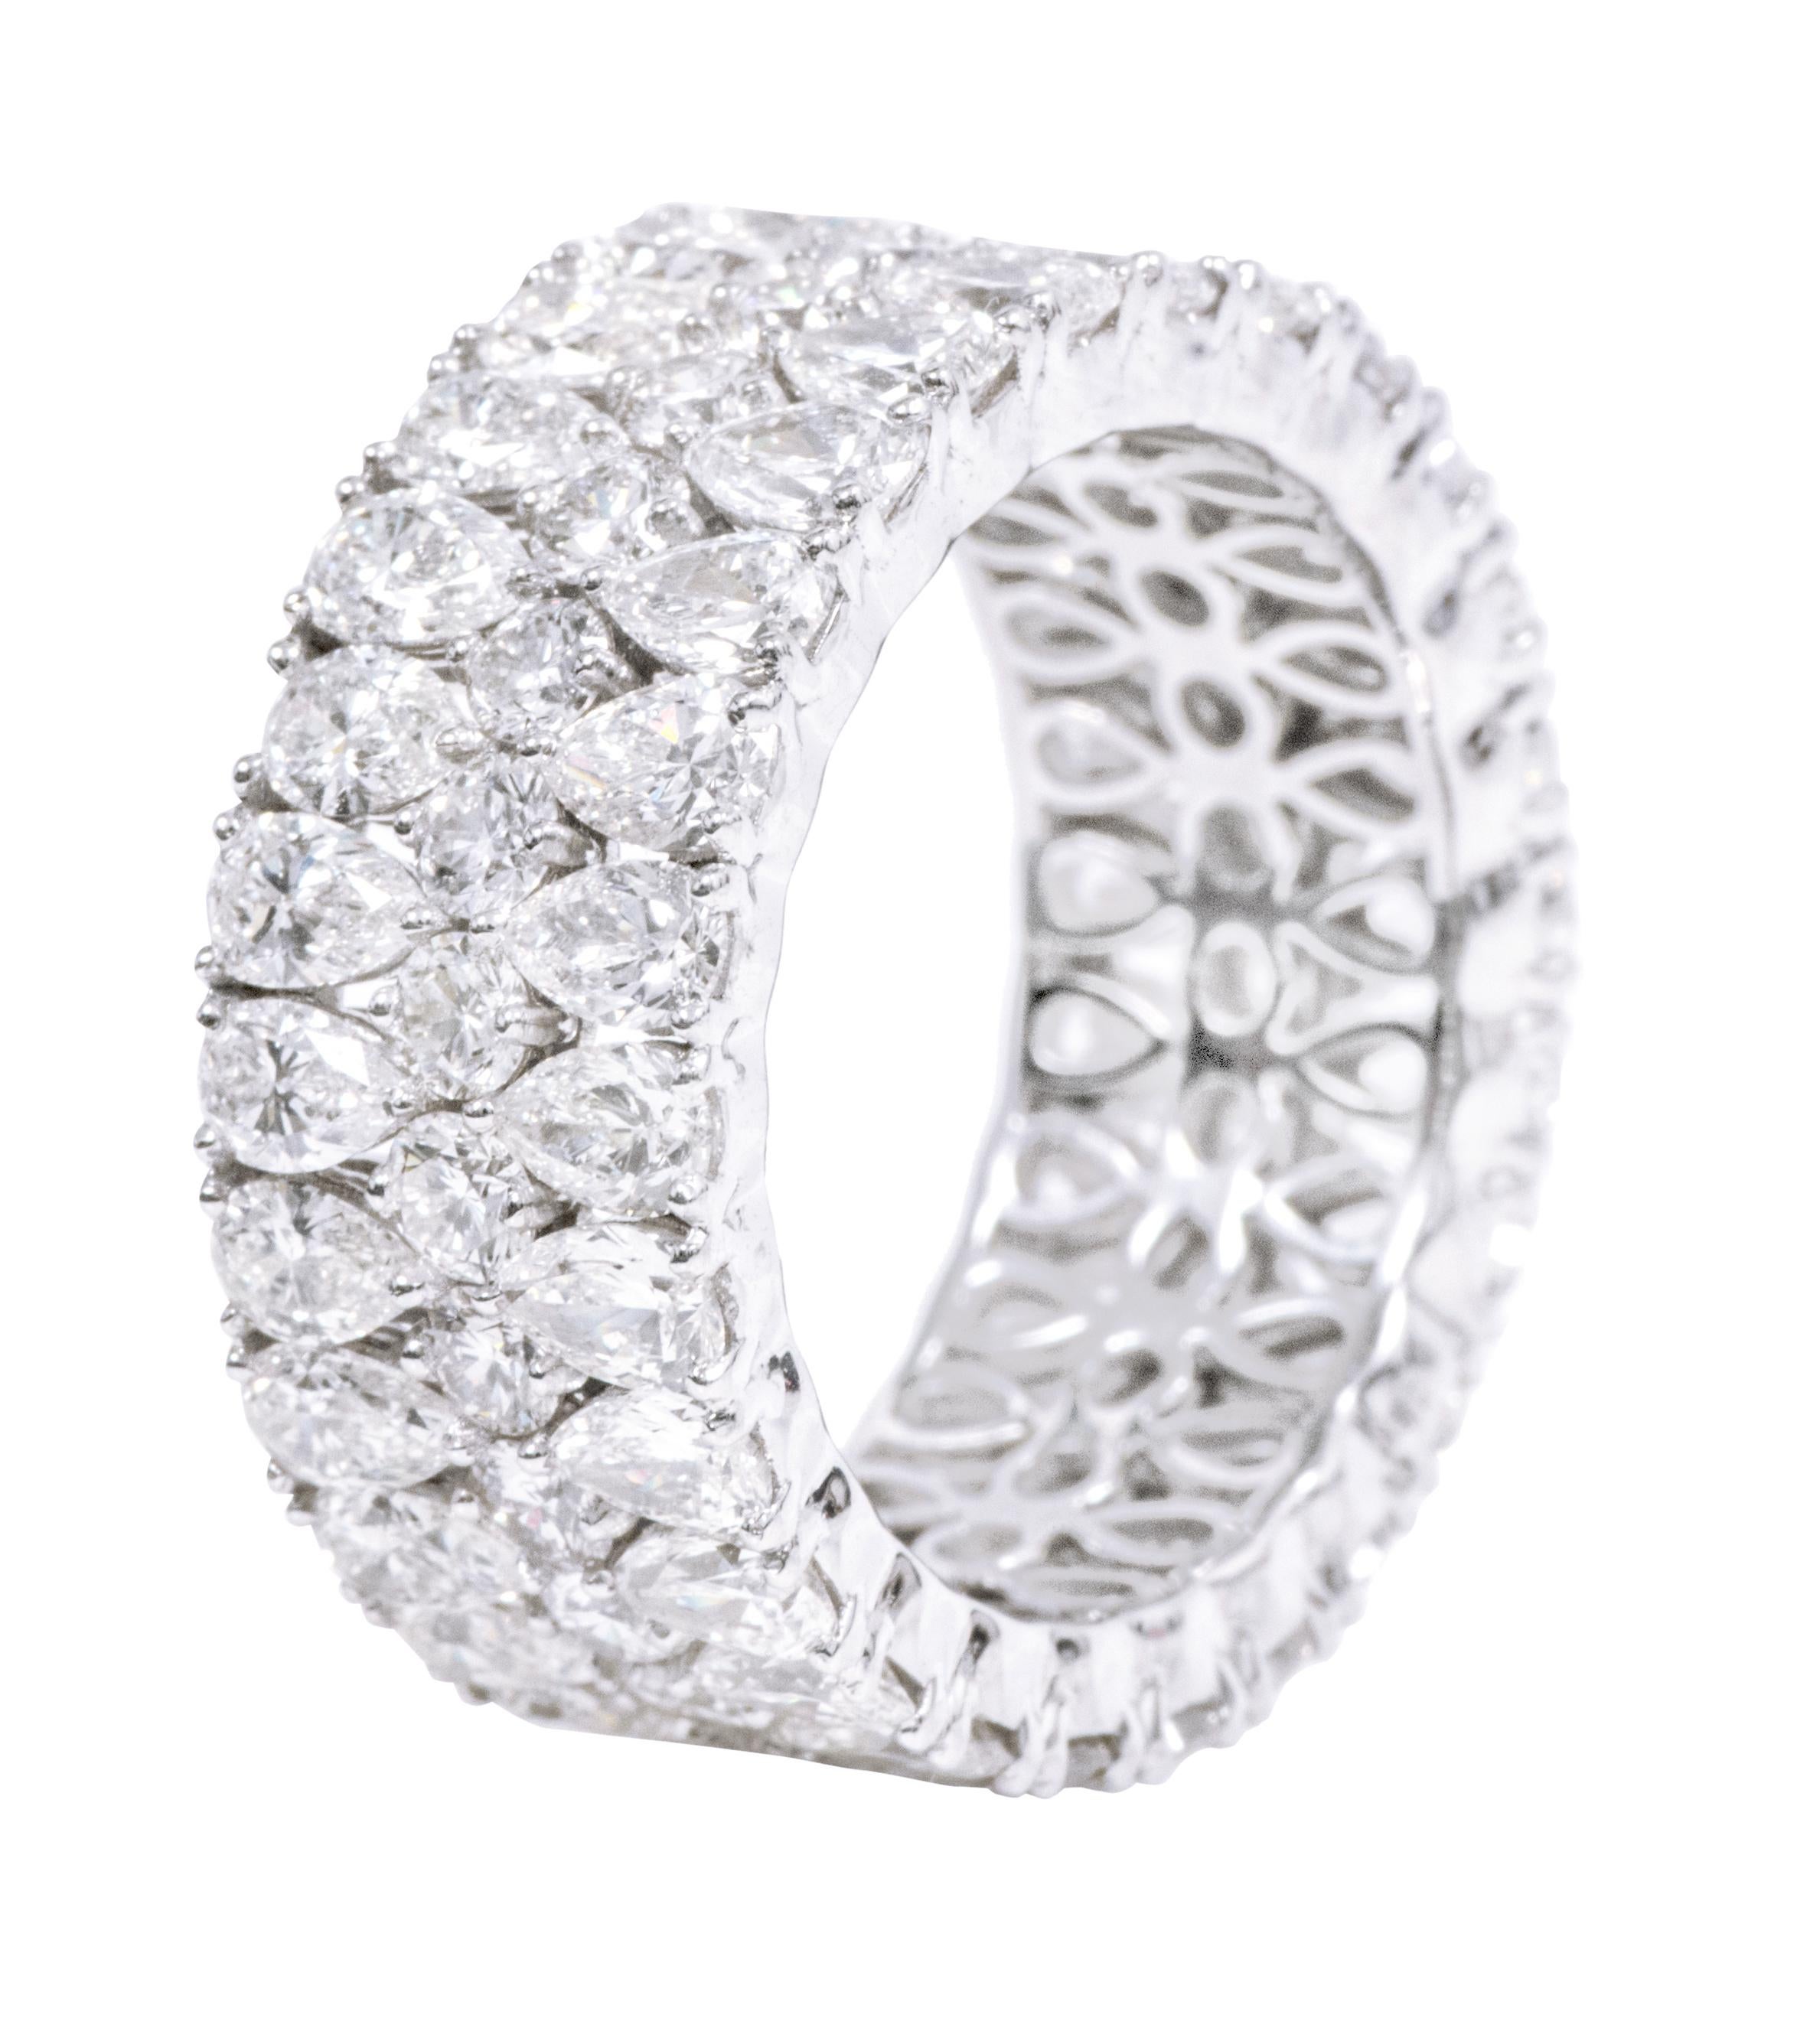 18 Karat White Gold 6.62 Carat Solitaire Diamond Eternity Band Ring

Love is an eternal feeling that fills our hearts with joy and enchanting renditions. It is a symphony of bliss and to shower love on your partner, we present this gorgeous diamond